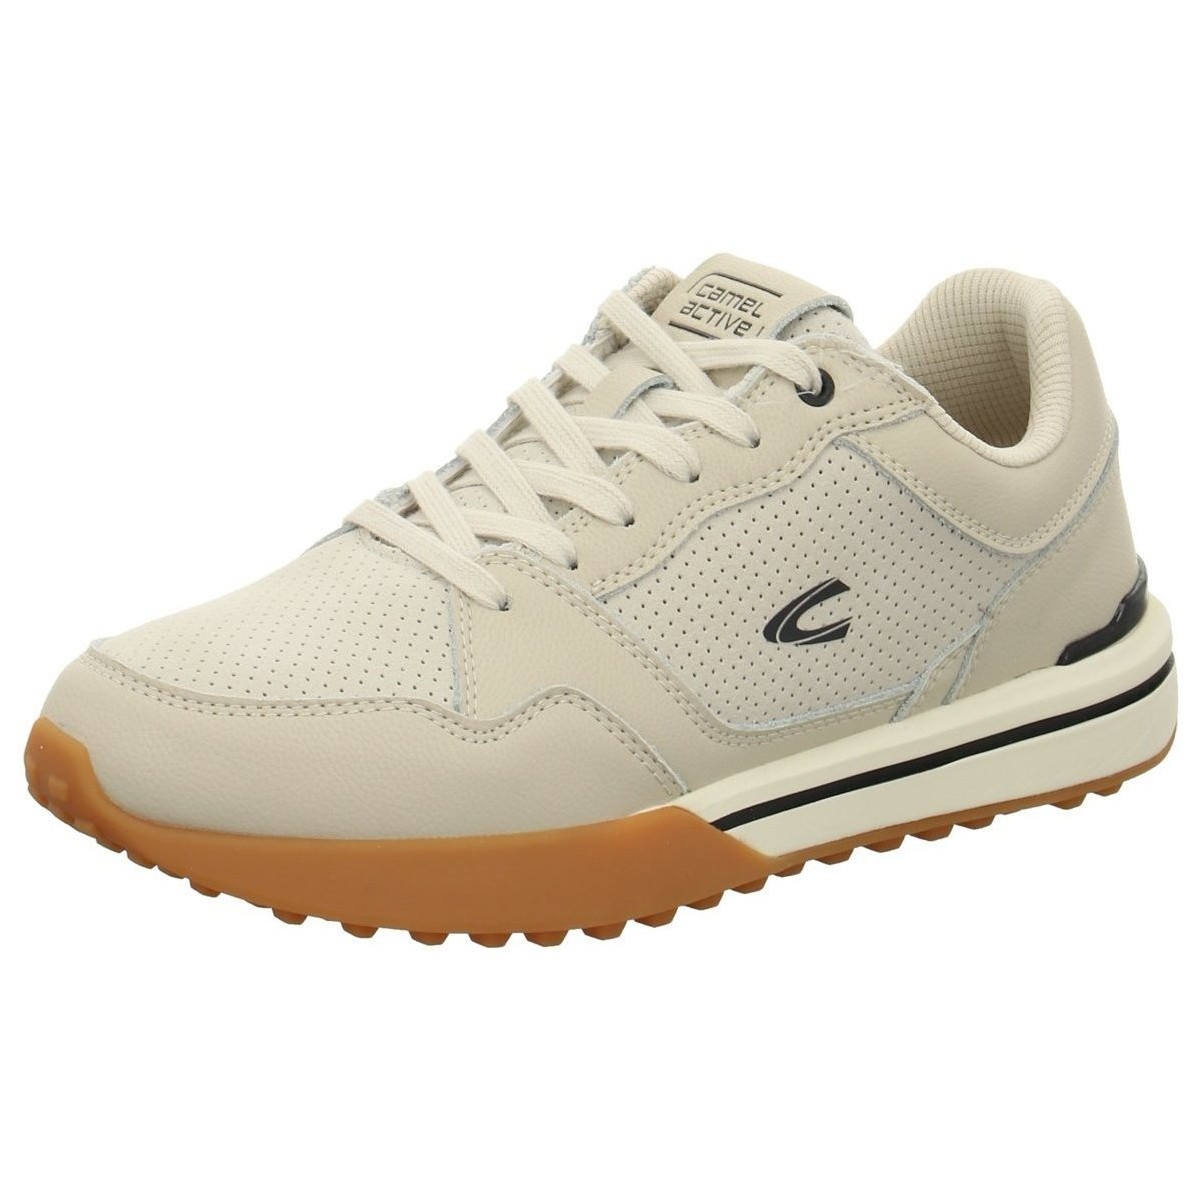 Chaussures Homme Baskets mode Camel Active  Beige